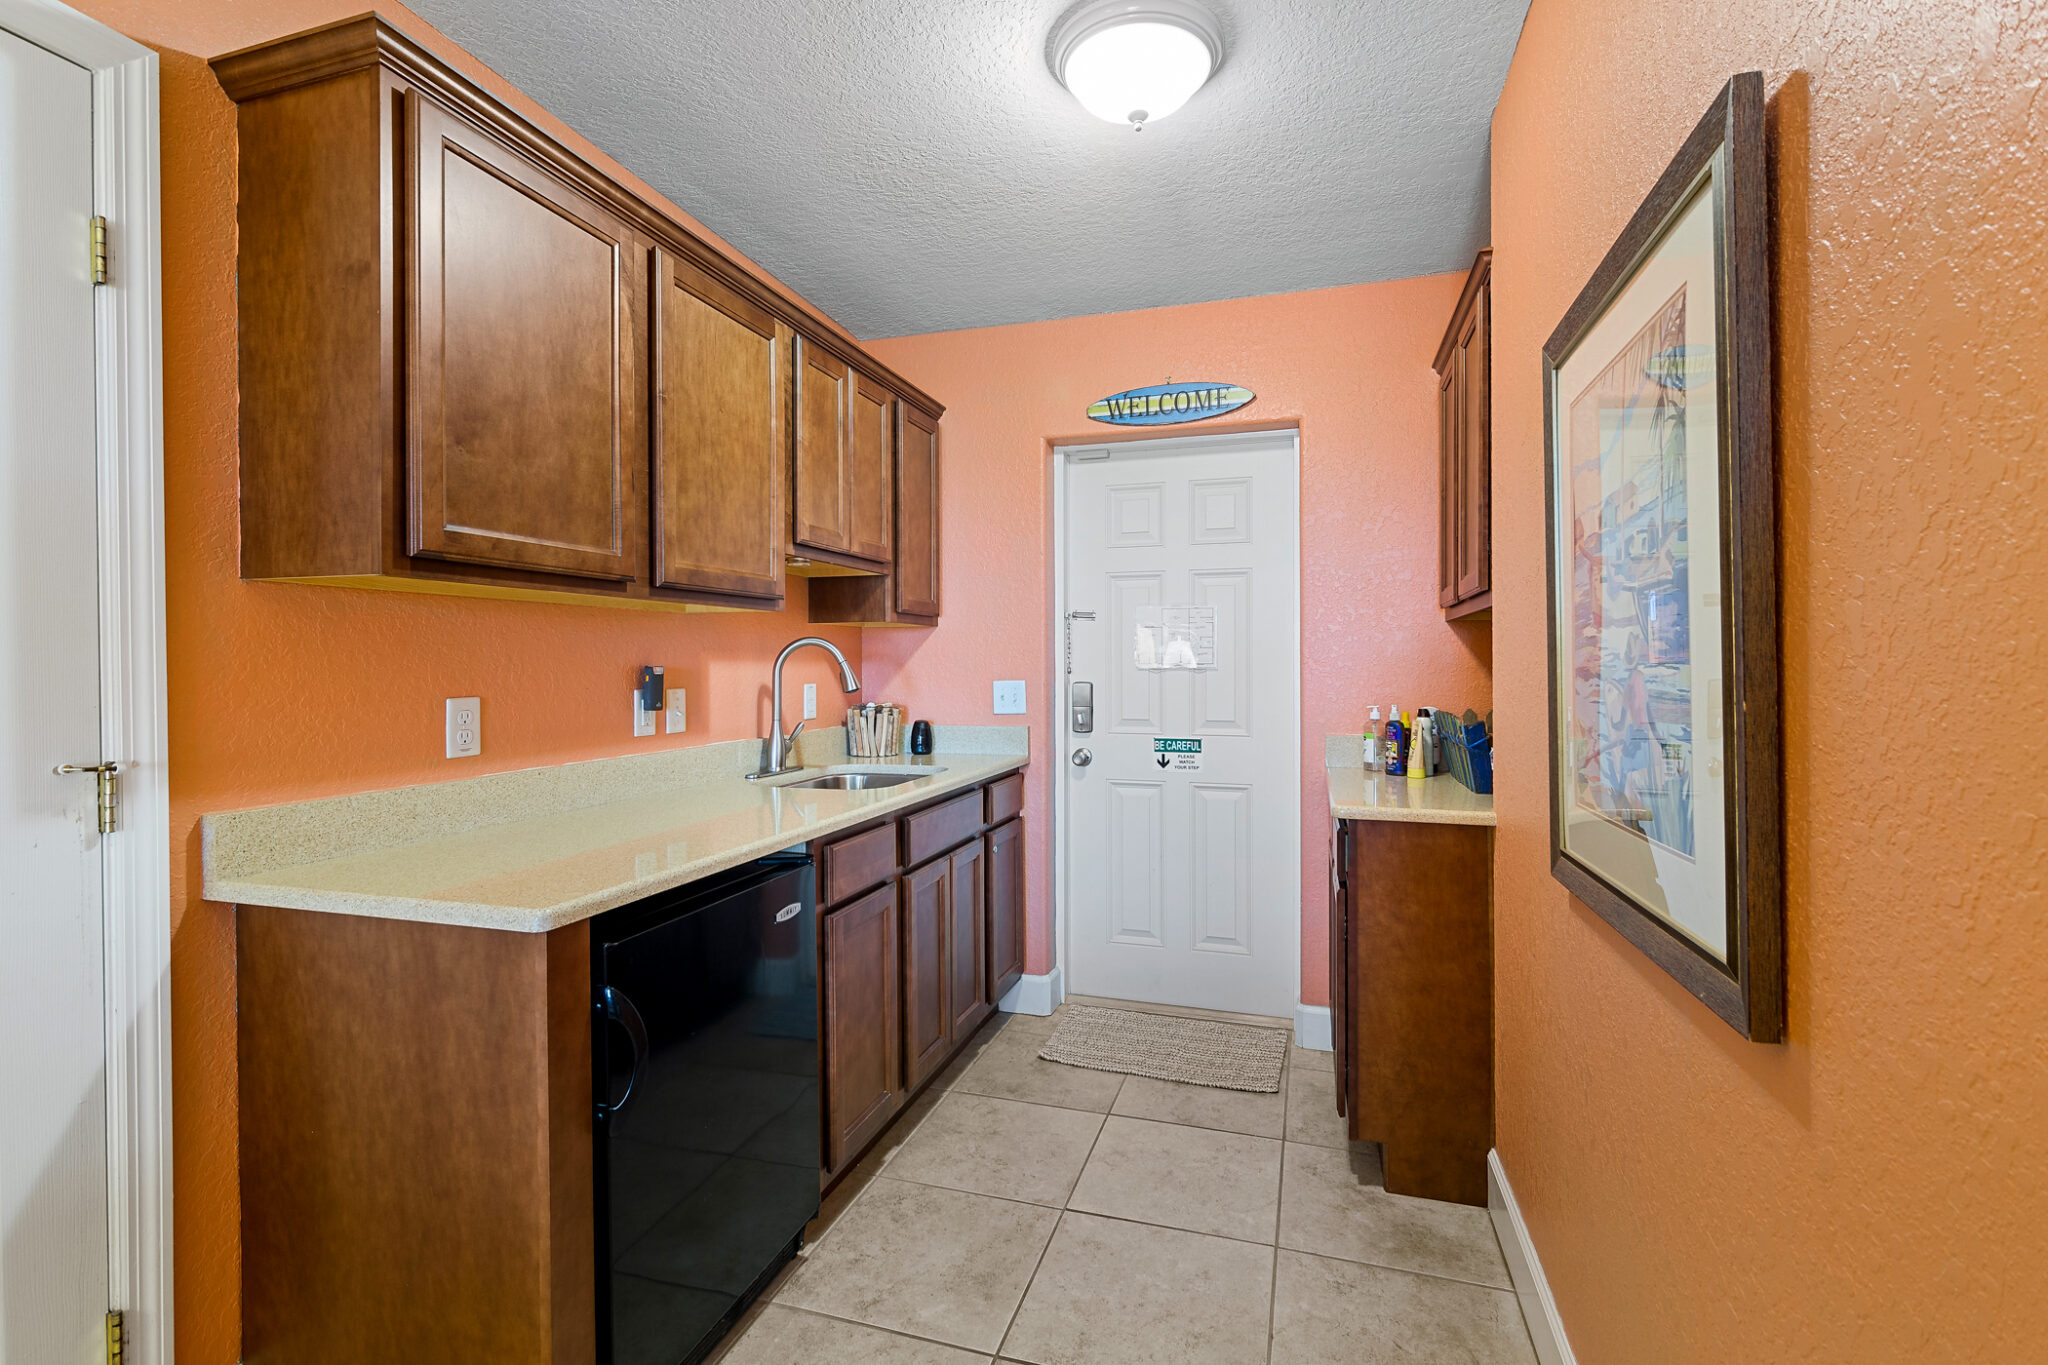 Kitchen area with light orange paint and gold marble countertops